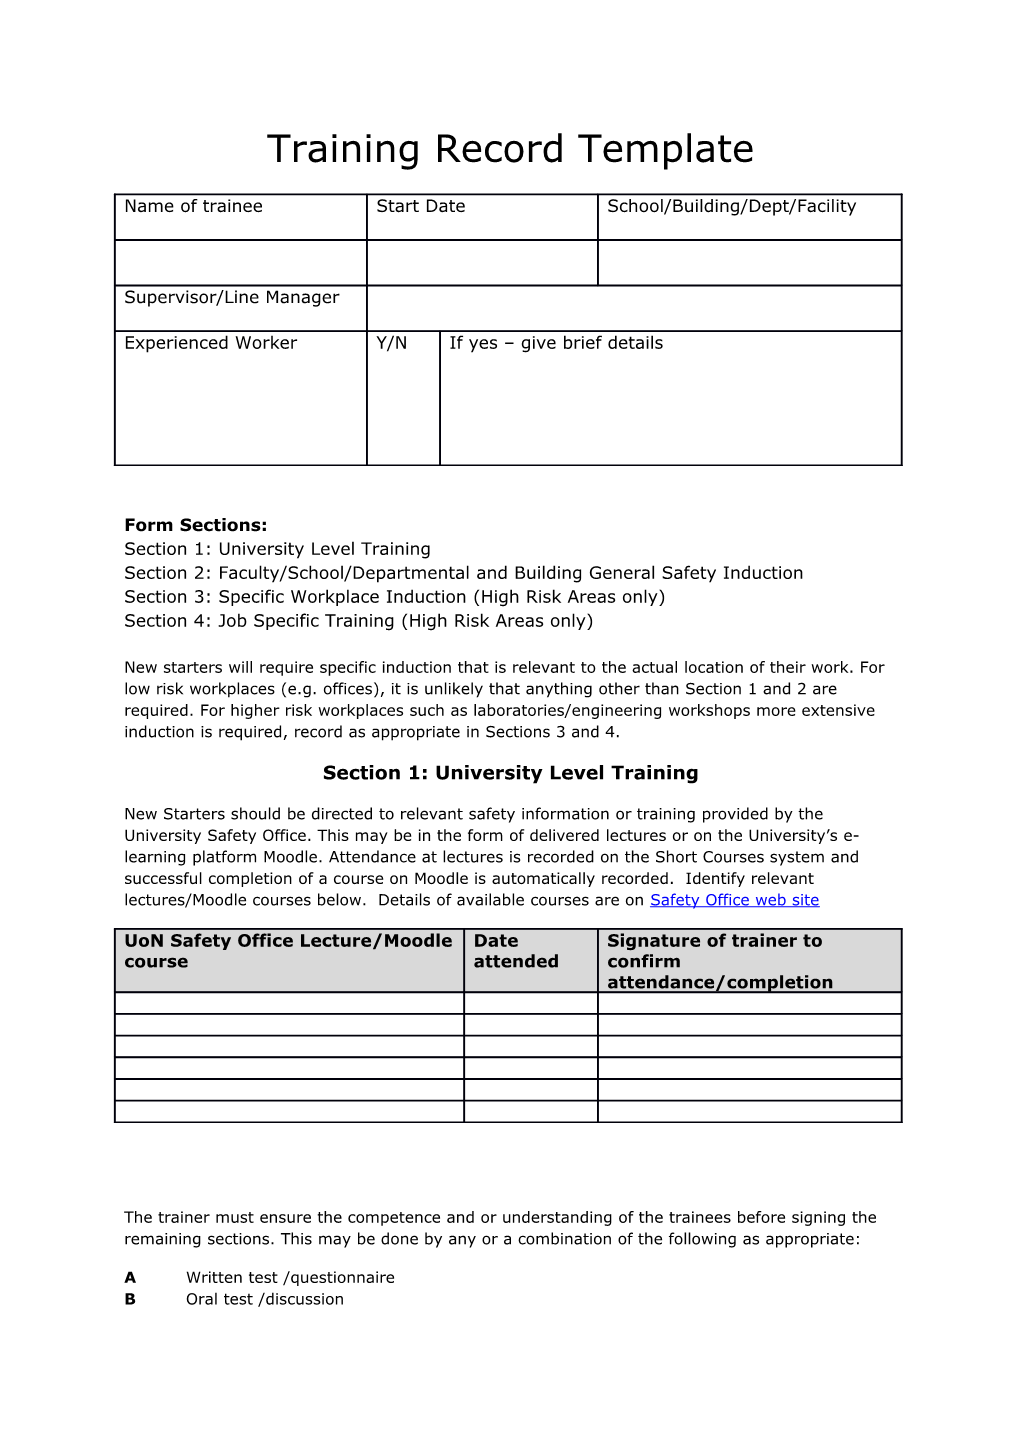 Training-Record-Template